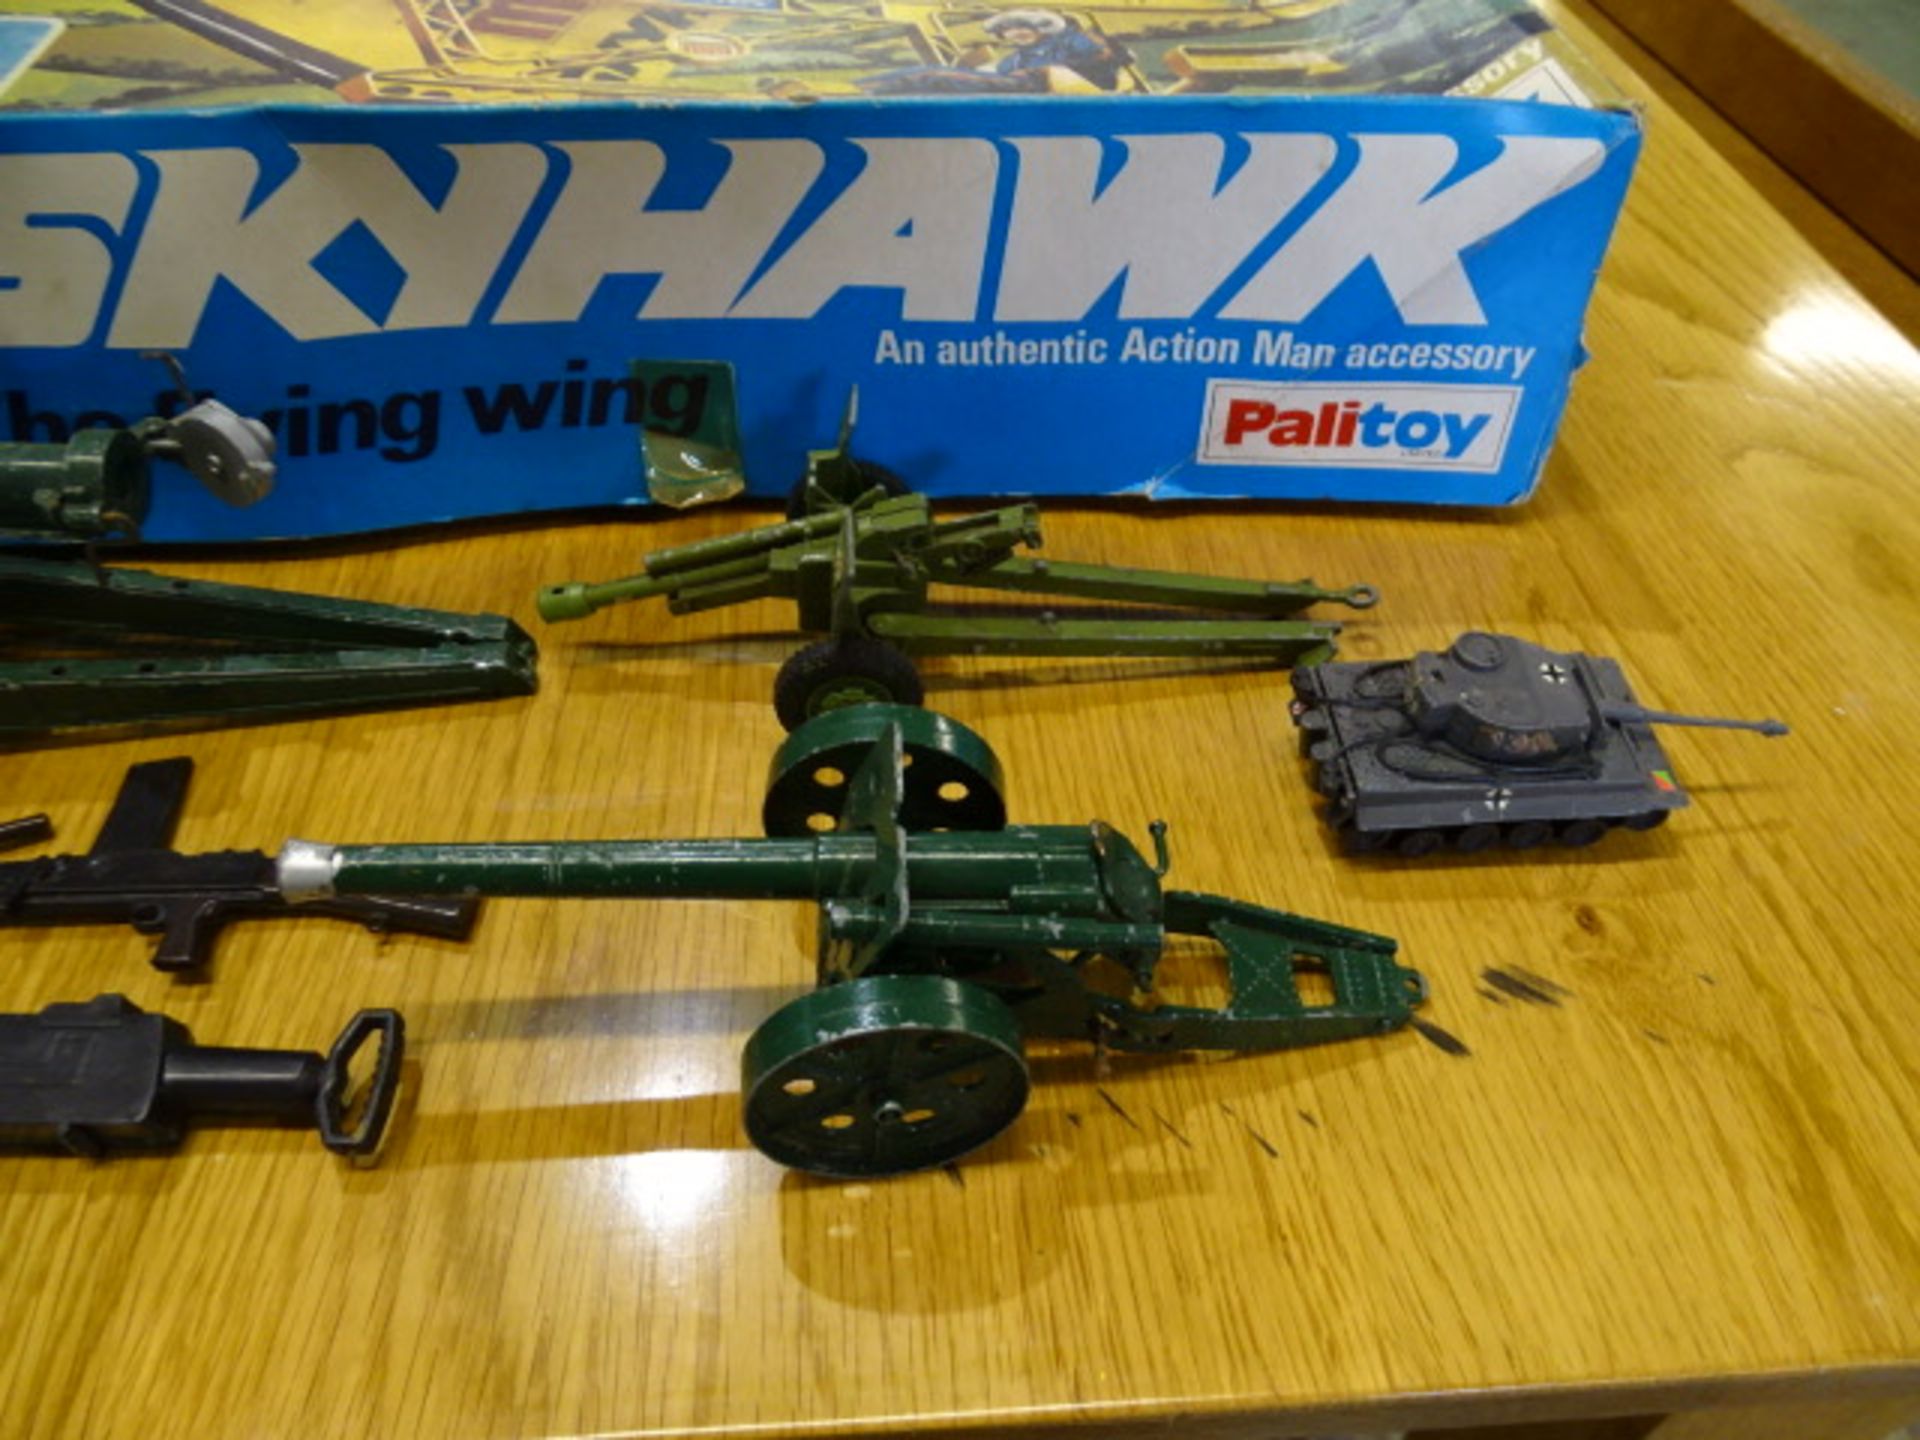 Vintage boxed Palitoy Action Man 'Skyhawk', G.I.JOE action figure and diecast cannons to include - Image 6 of 7